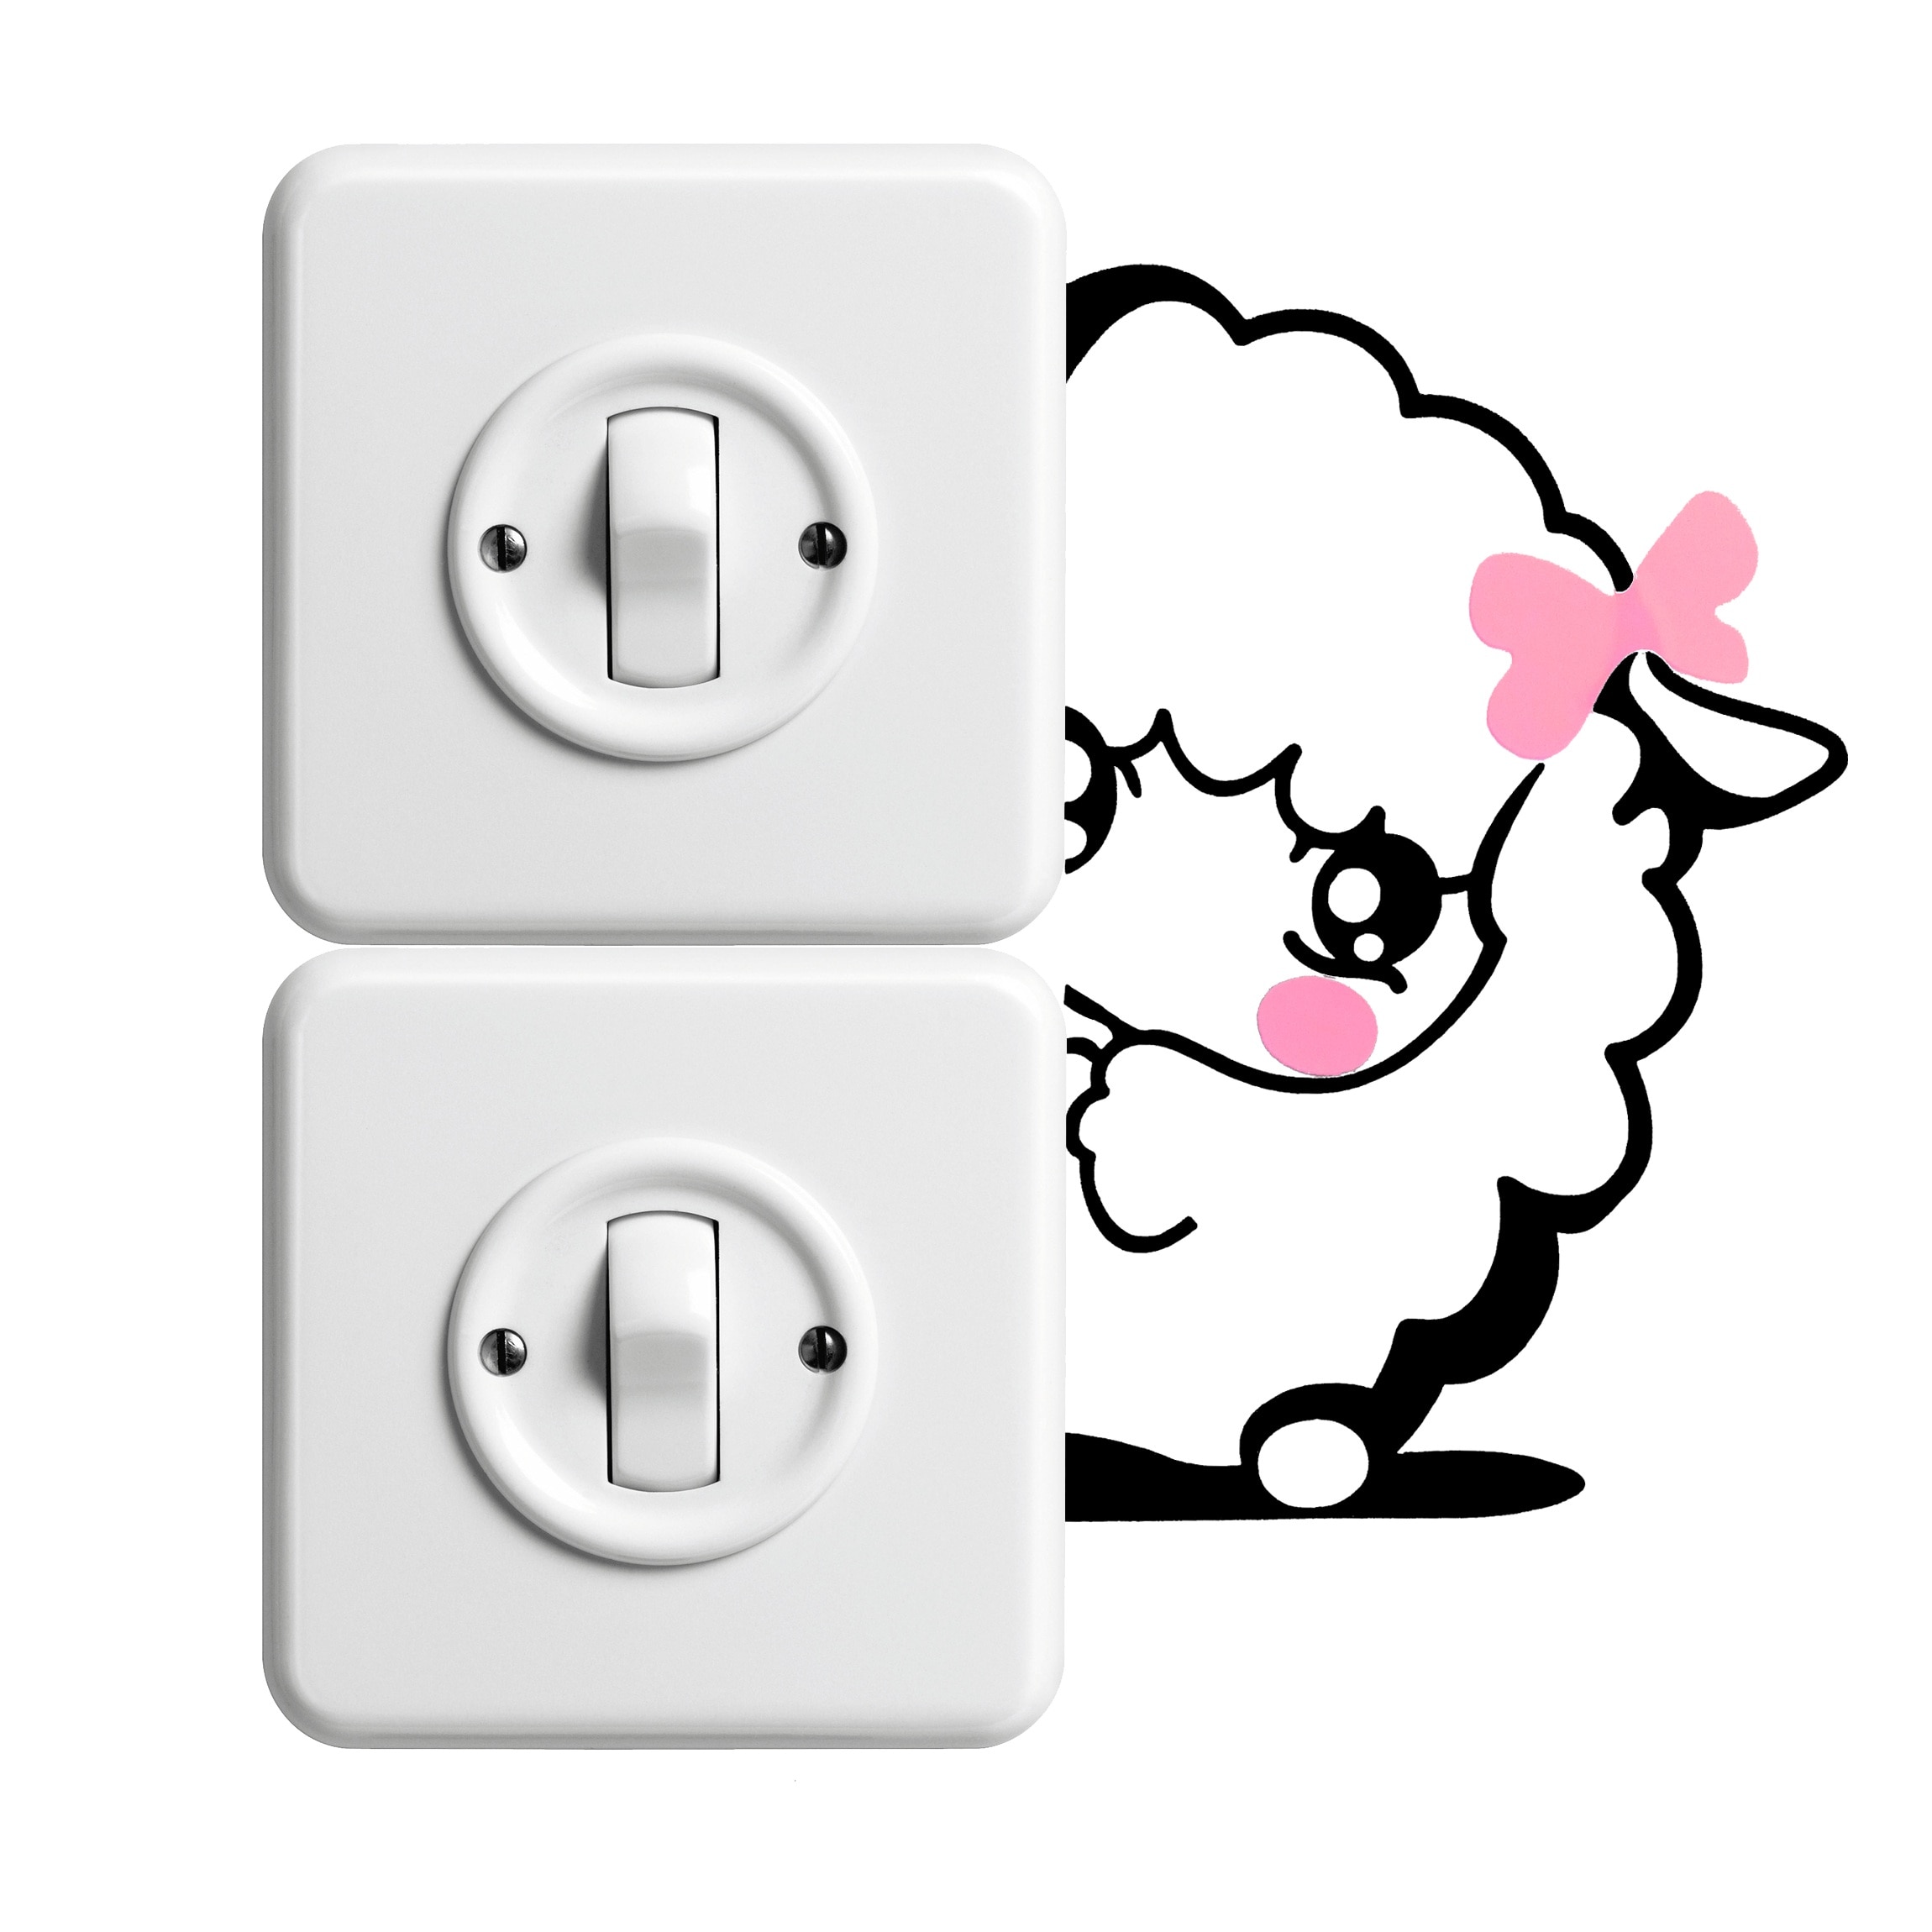 two white switches and white animal illustration